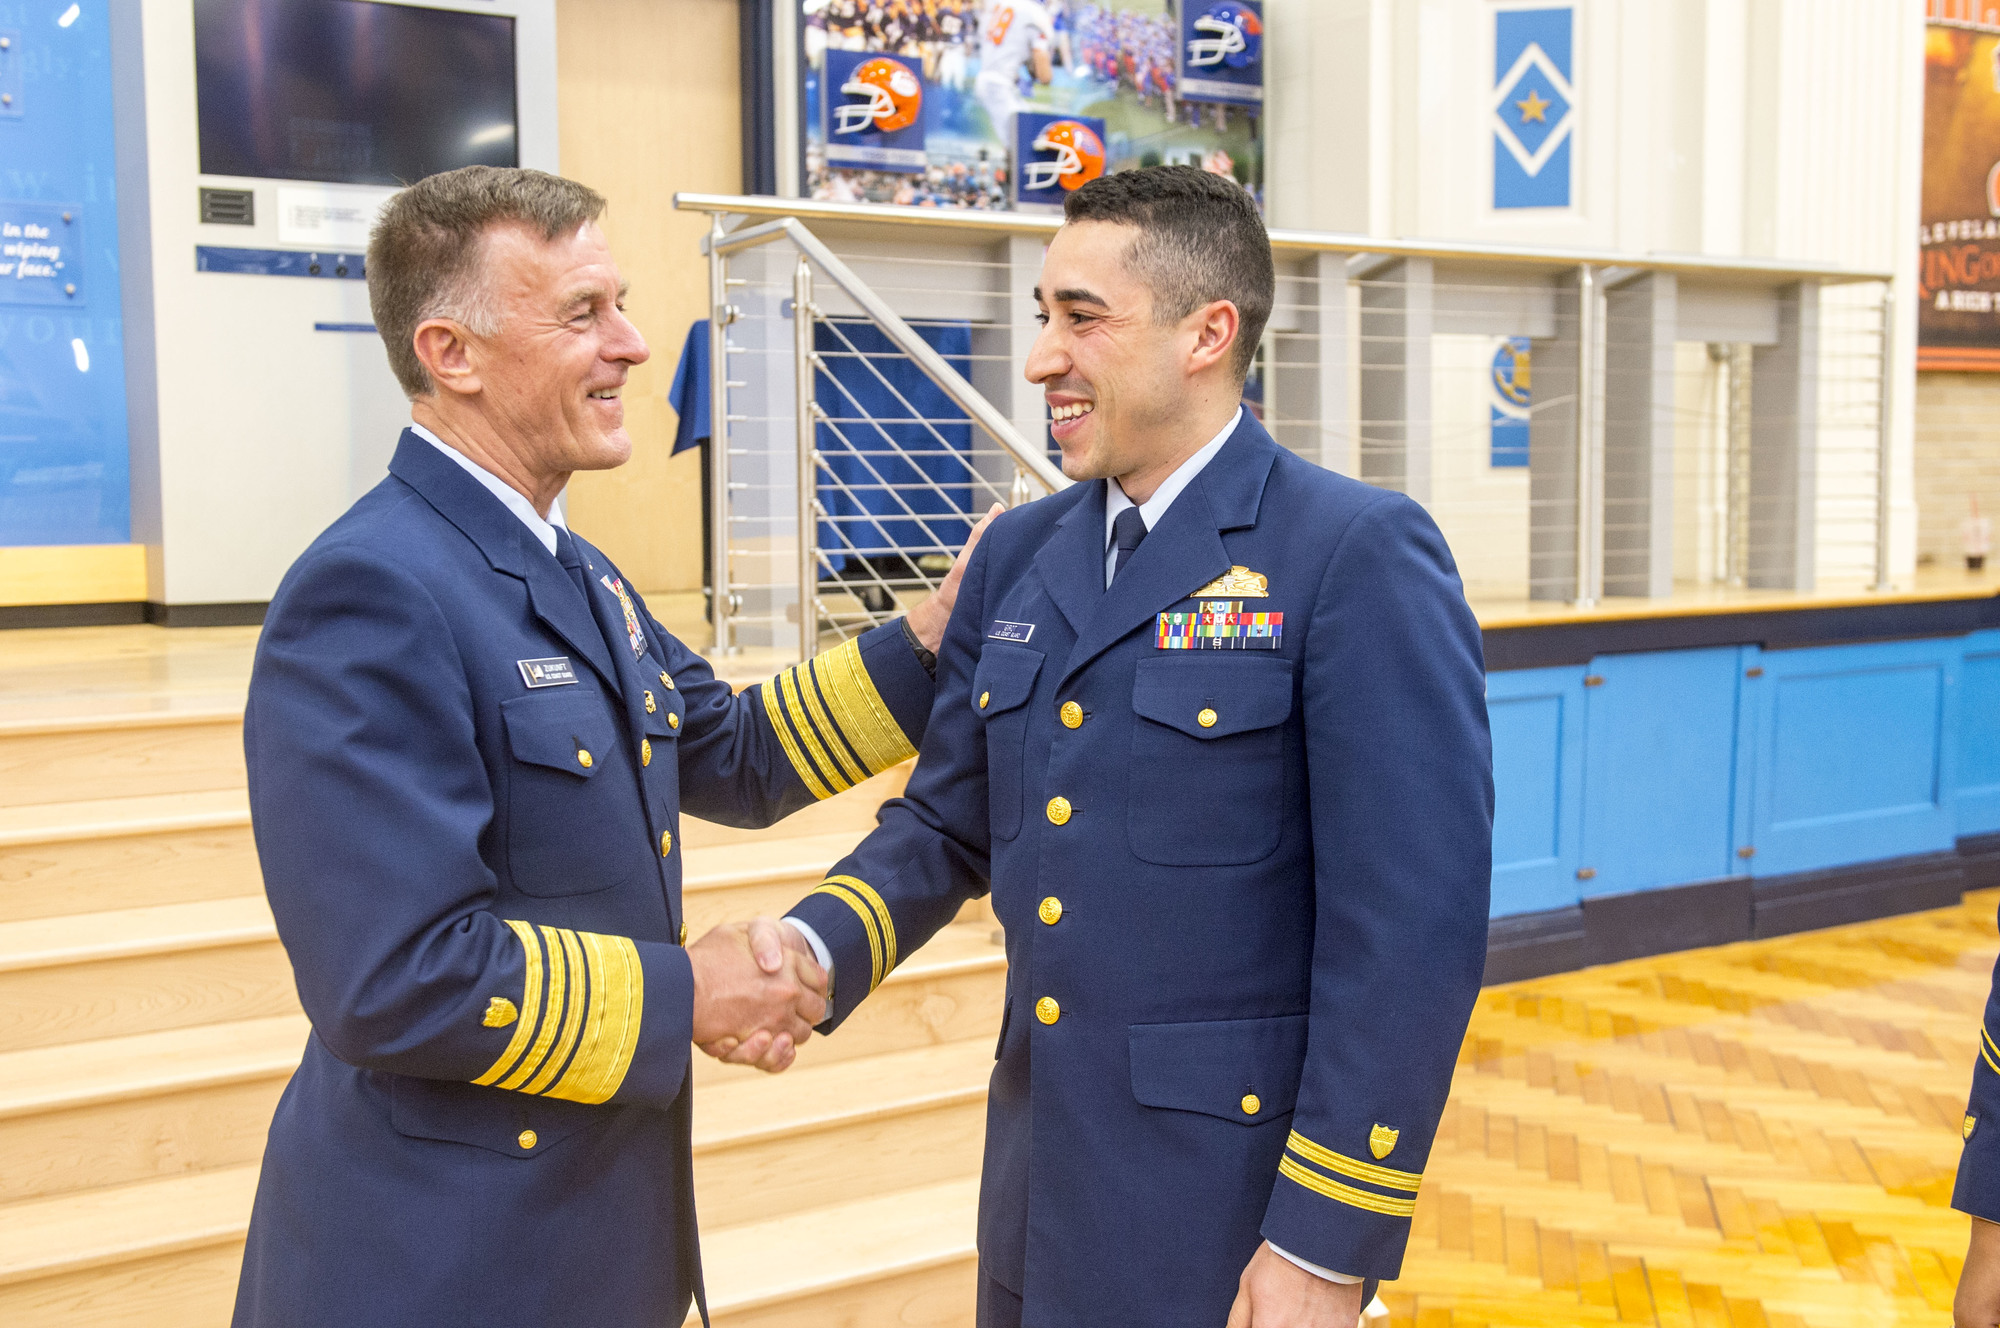 Eclipse Awards were created to recognize the efforts made by individuals in mentoring cadets to excel as lasting and inclusive Coast Guard officers.